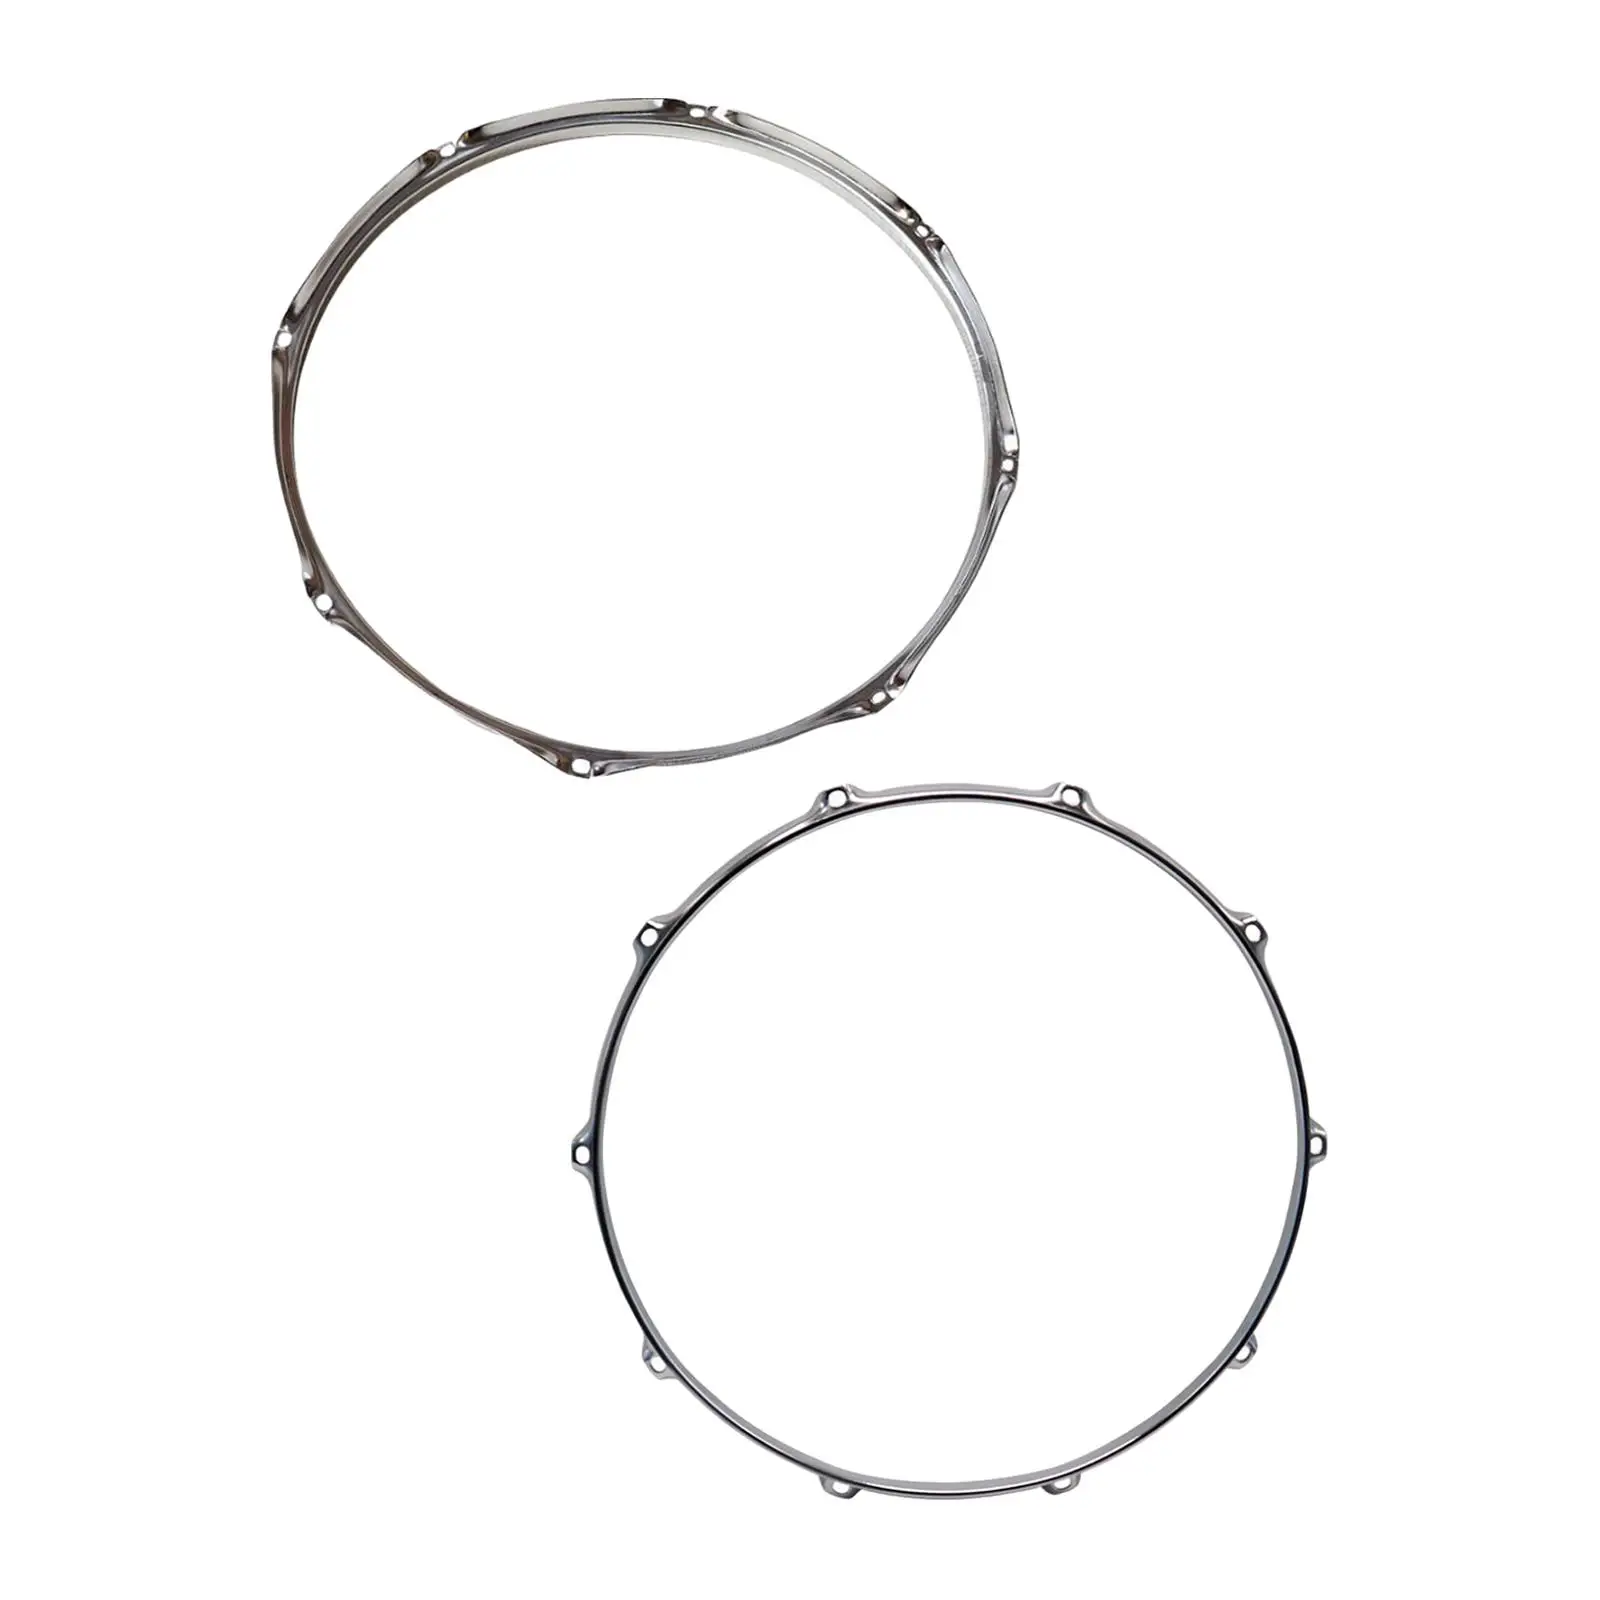 Rim Batter Hoop Percussion Instrument Parts Replacement Heavy Duty 14 inch 8 Lug Batter Hoop Drum Hoop for Instrument Office